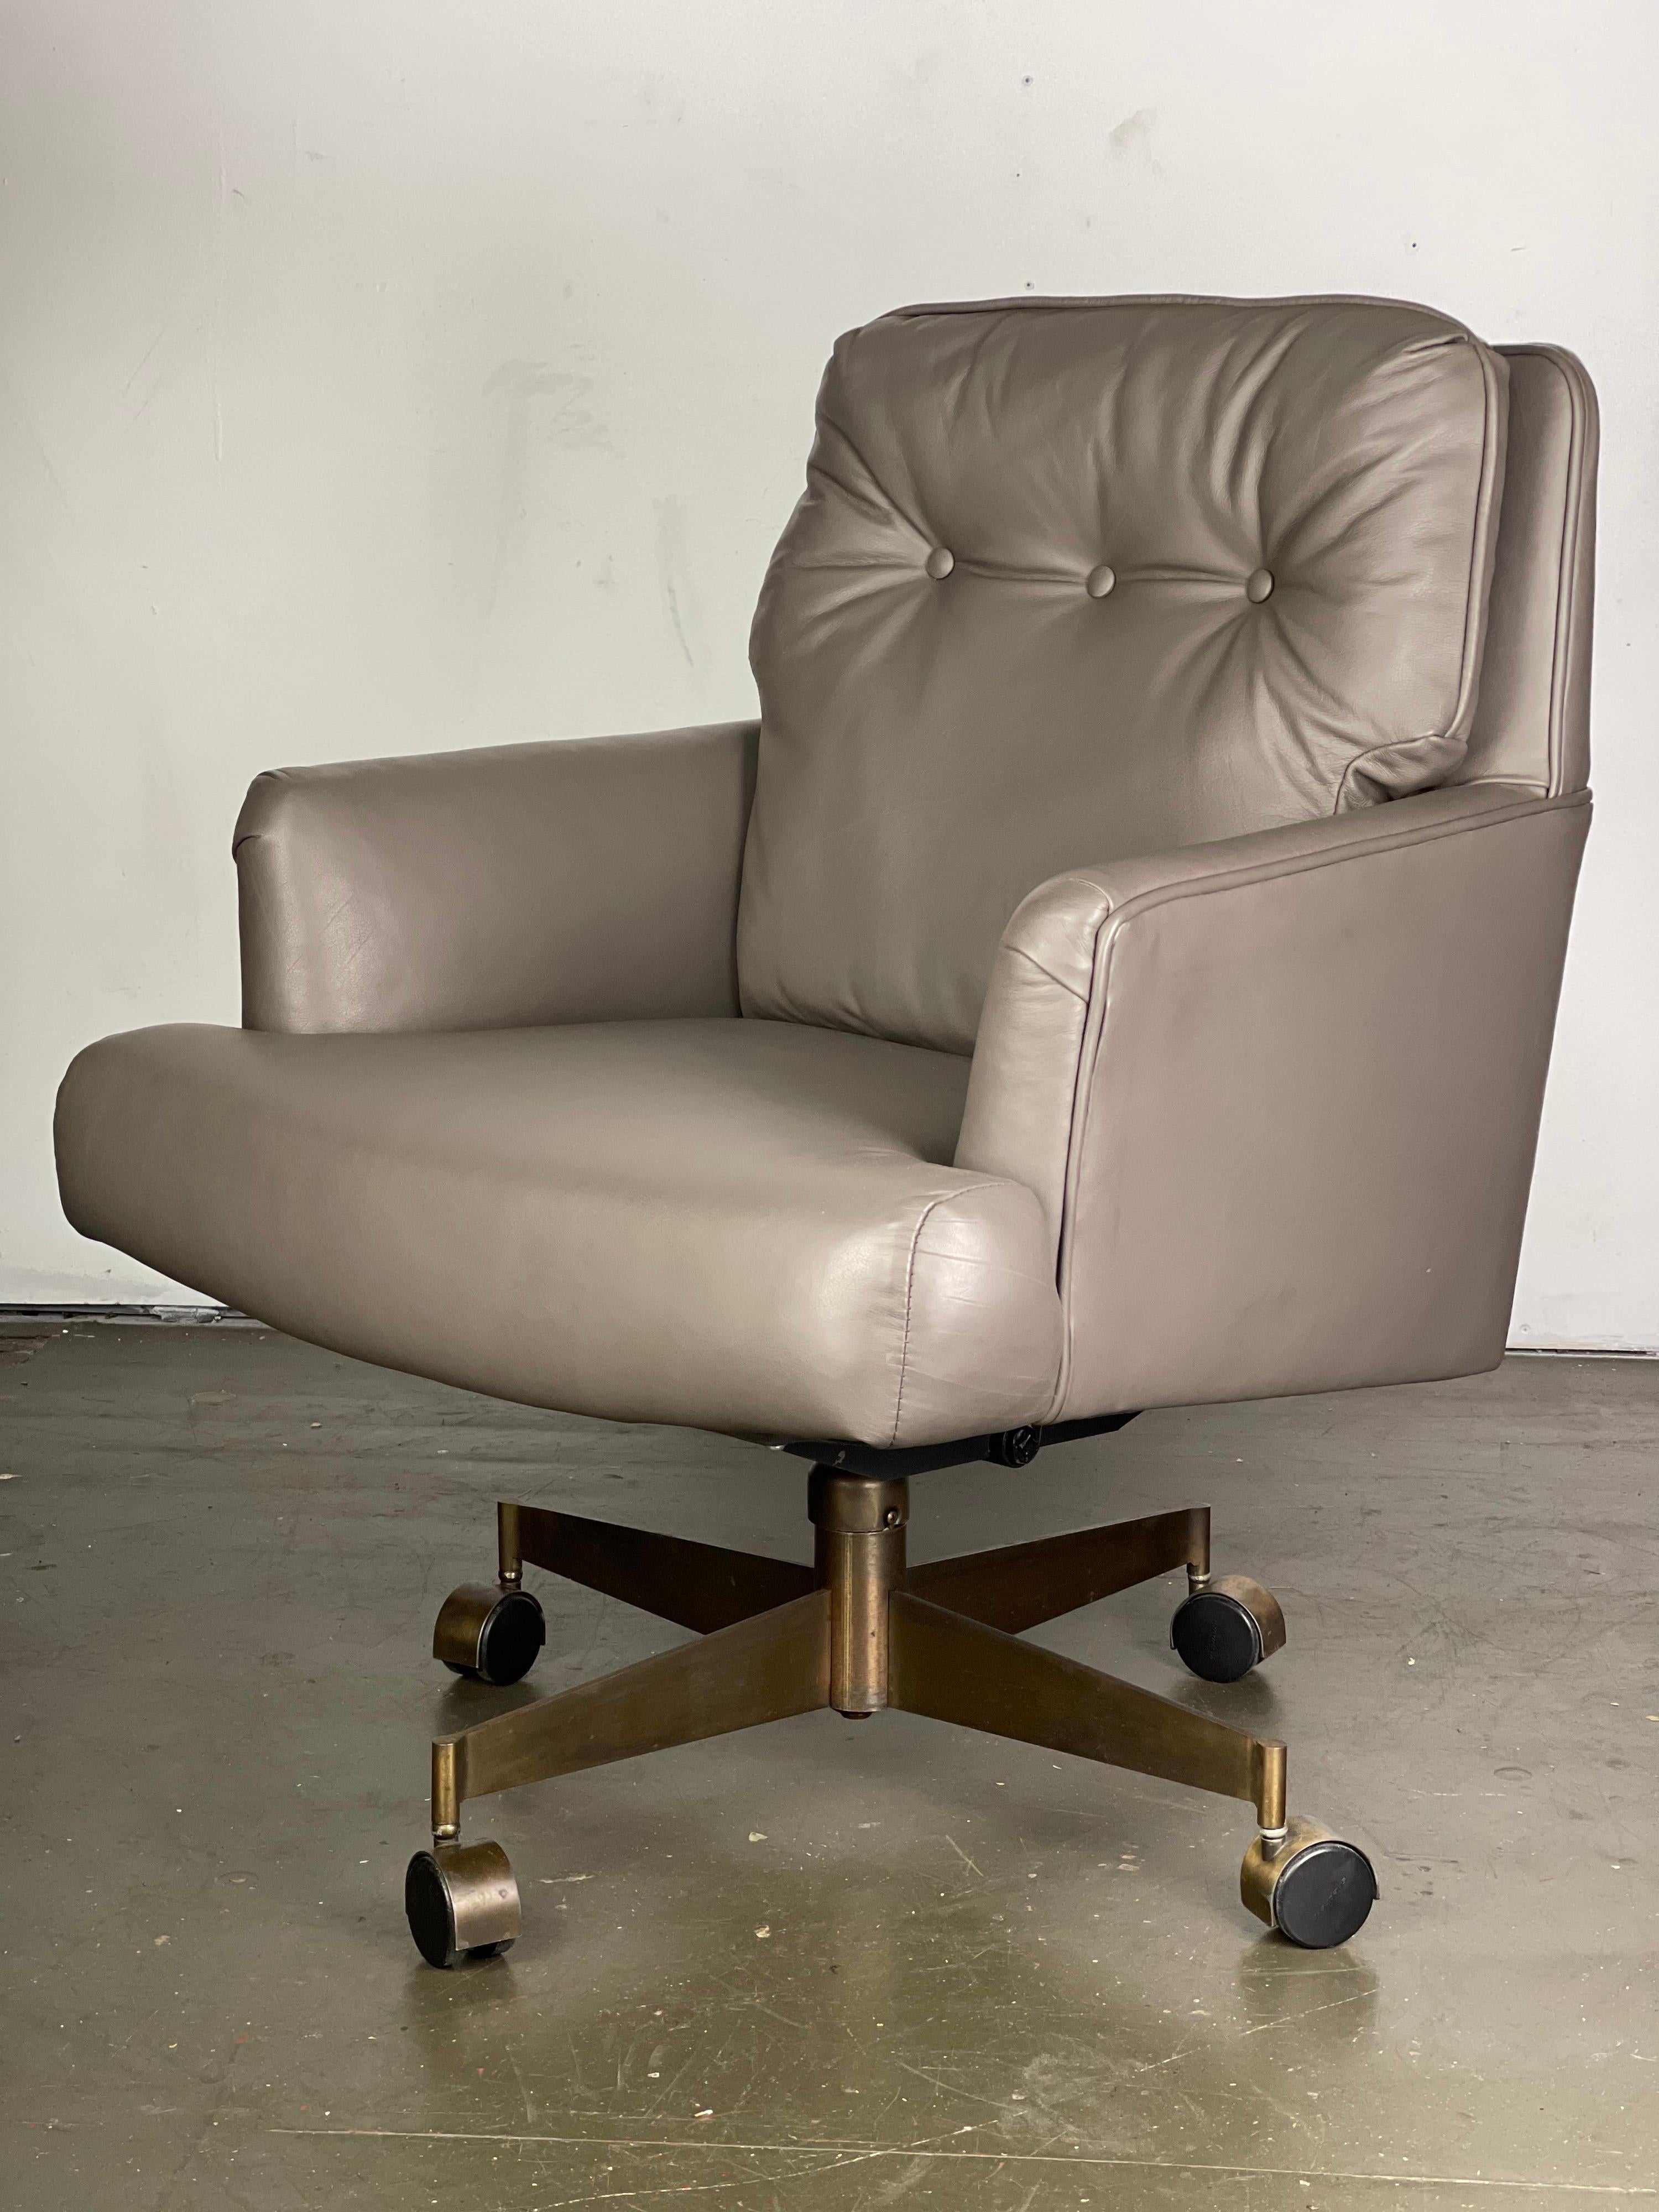 Reupholstered Dunbar executive office chair. Redone in a soft grey leather. Antiqued brass base. Rolls and tilts and swivels wonderfully. Spins up and down - photographed at 19